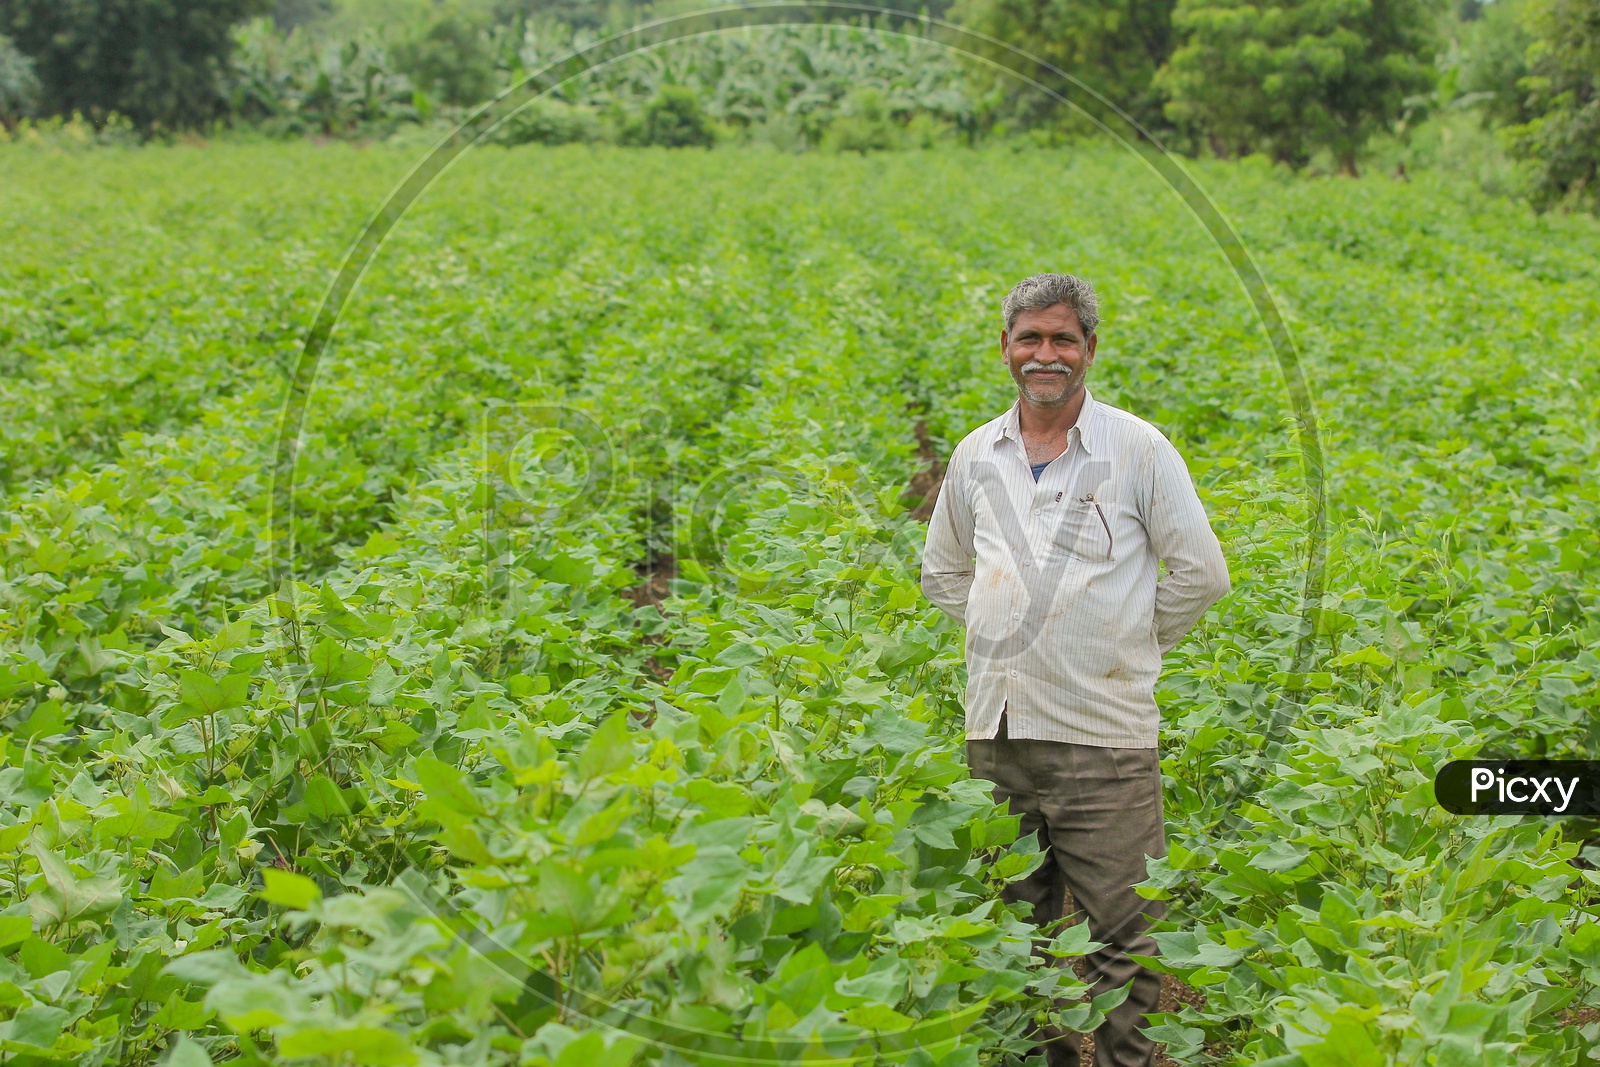 An Indian Farmer in Cotton Field and Smiling